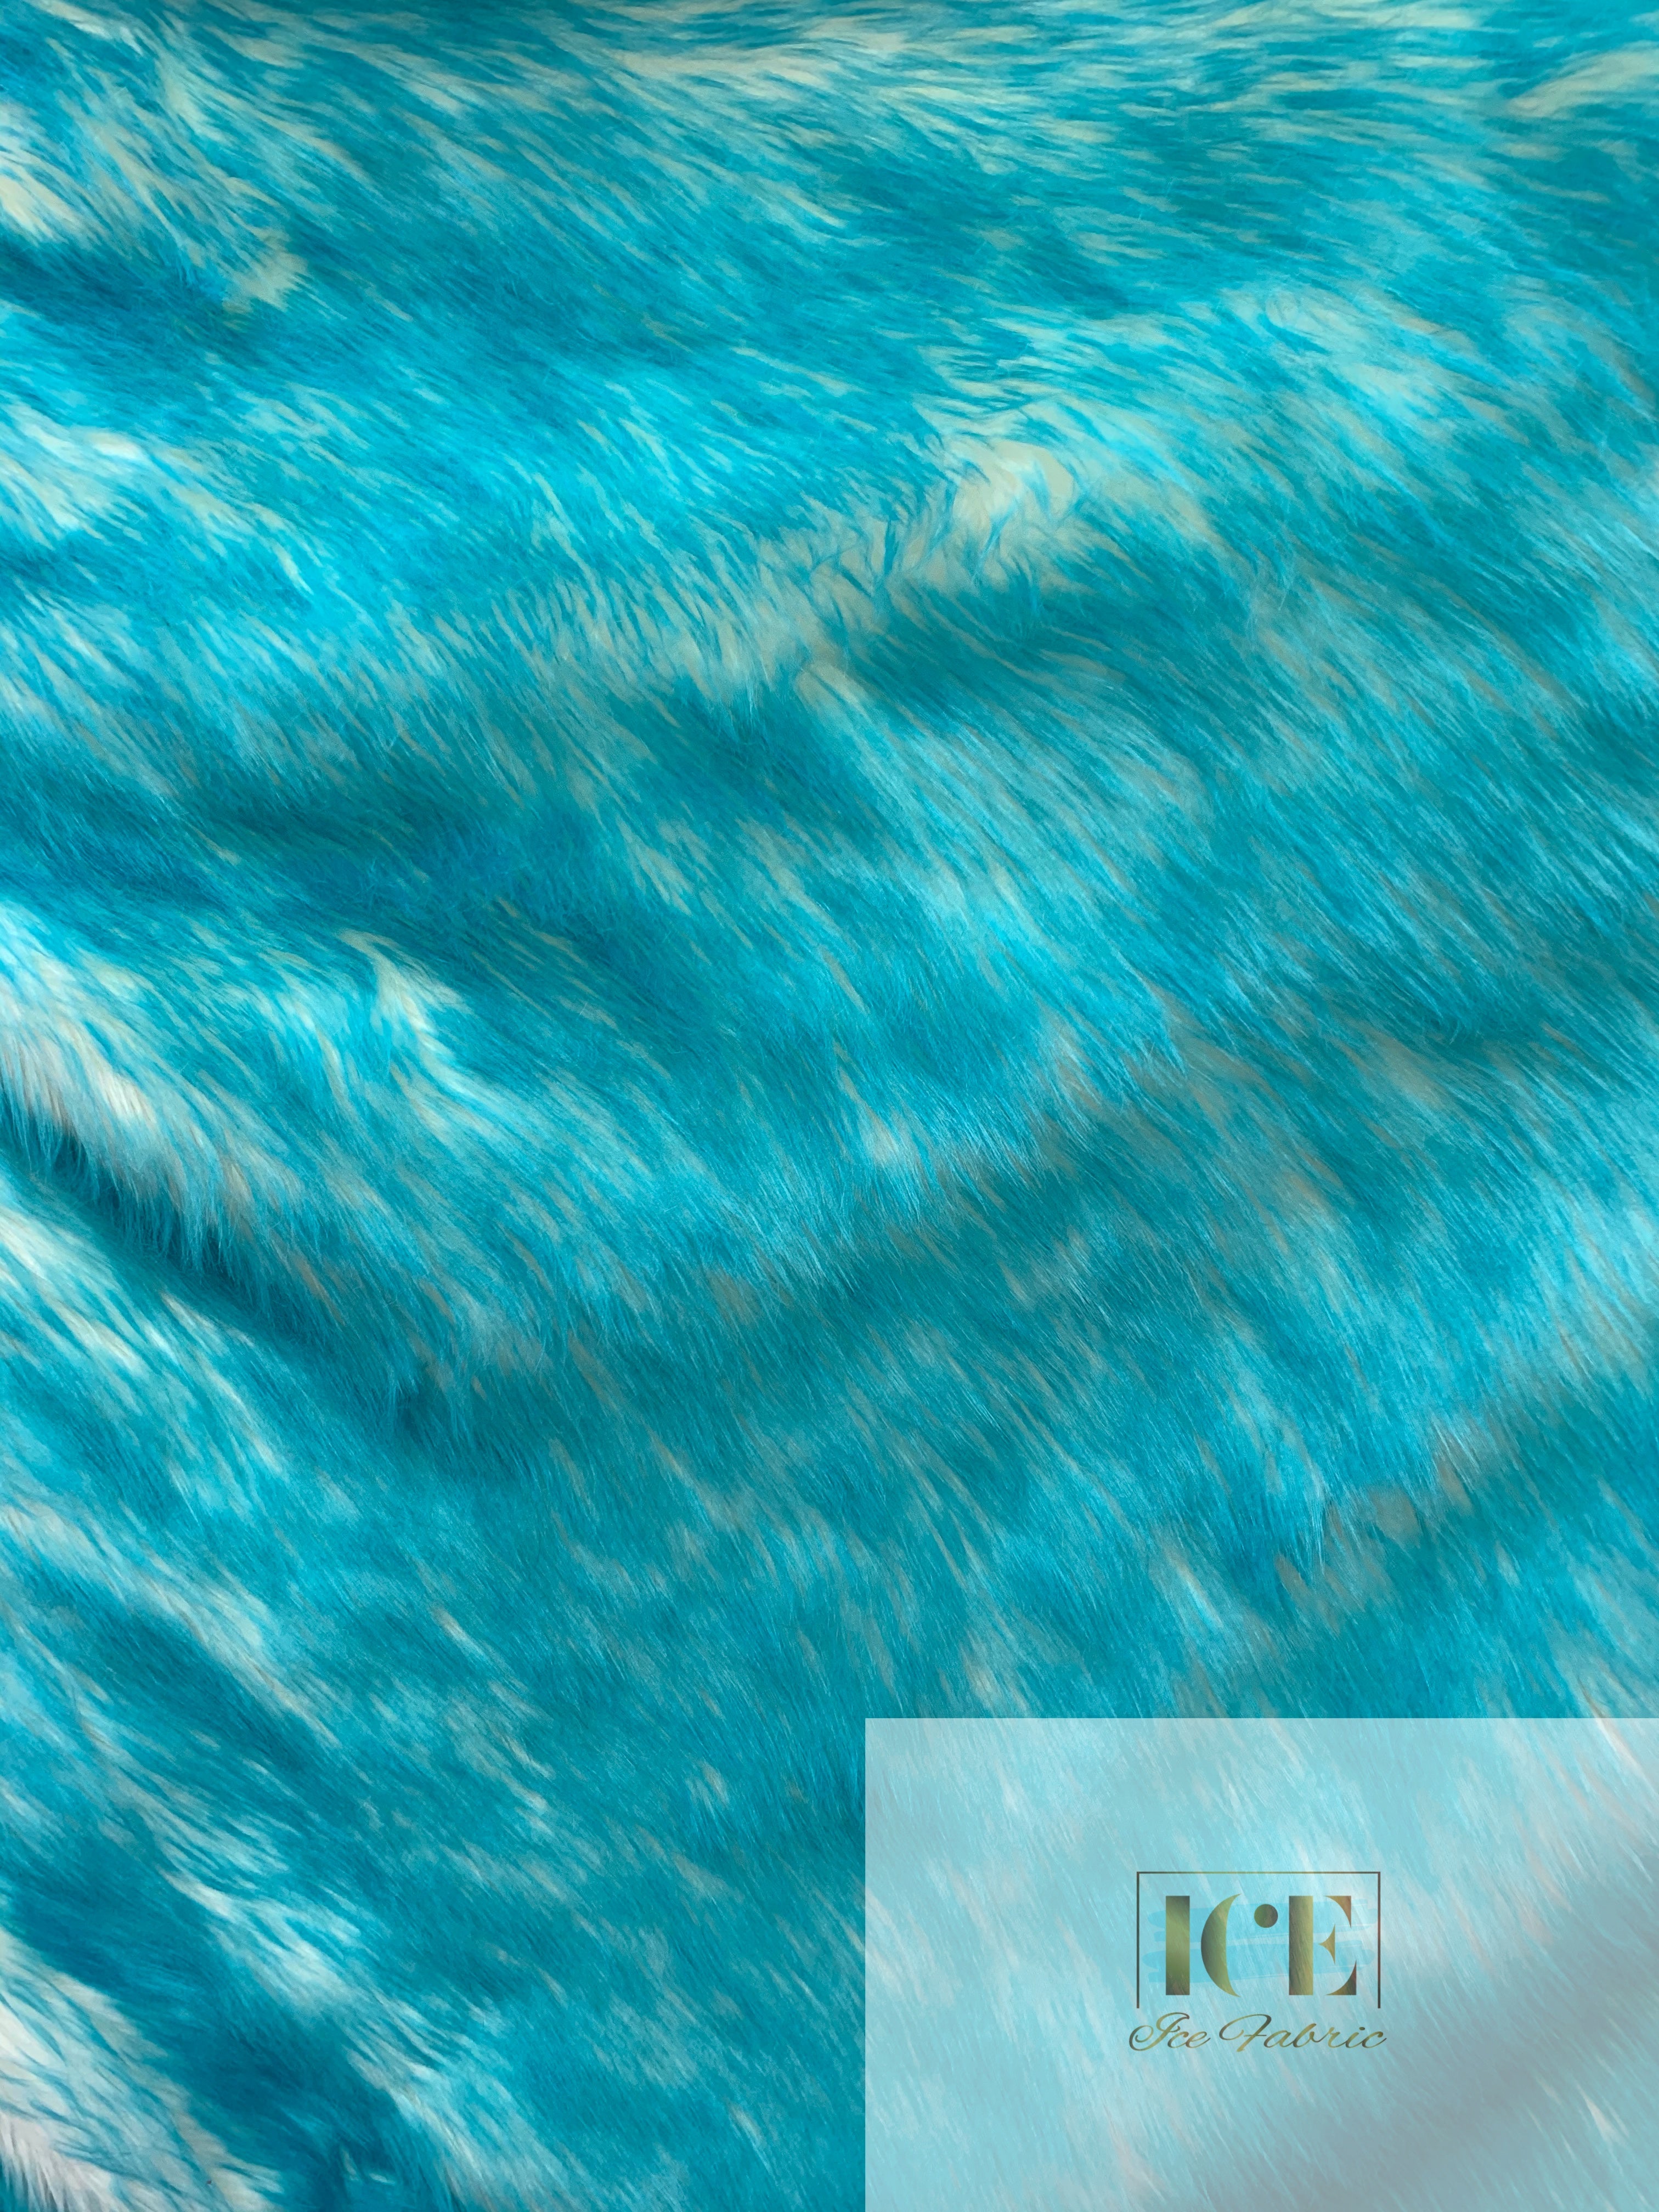 Canadian Fox 2 Tone Shaggy Long Pile Faux Fur Fabric For Blankets, Costumes, Bed SpreadICEFABRICICE FABRICSTurquoiseBy The Yard (60 inches Wide)Canadian Fox 2 Tone Shaggy Long Pile Faux Fur Fabric For Blankets, Costumes, Bed Spread ICEFABRIC Turquoise